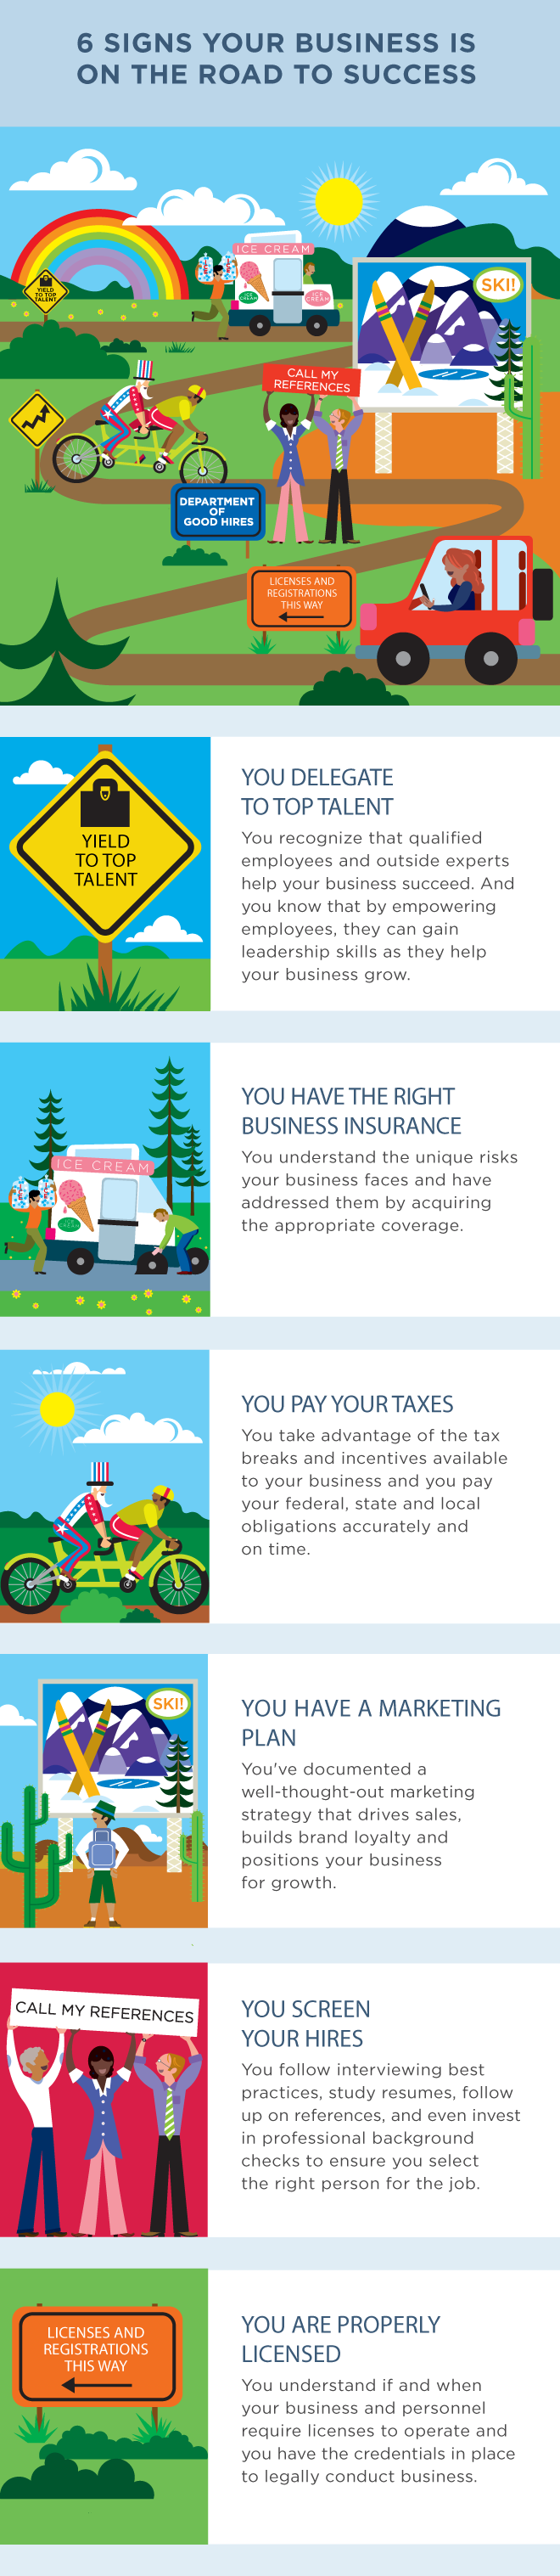 small business insurance for self employed